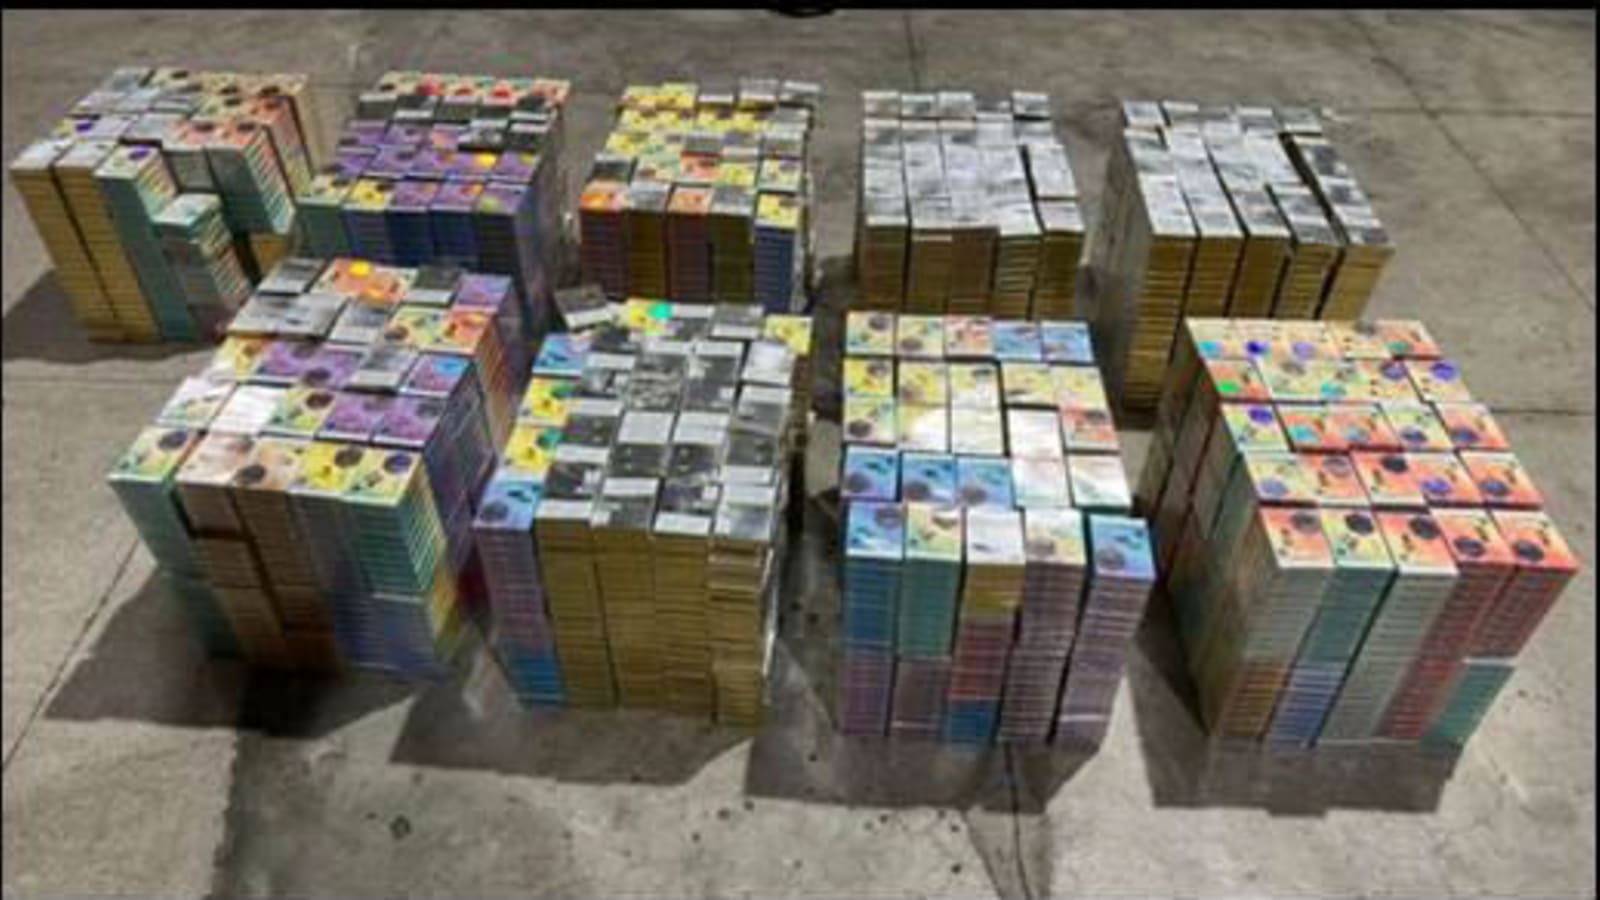 e-vaporisers-and-components-worth-more-than-s$300,000-seized-at-tuas-checkpoint